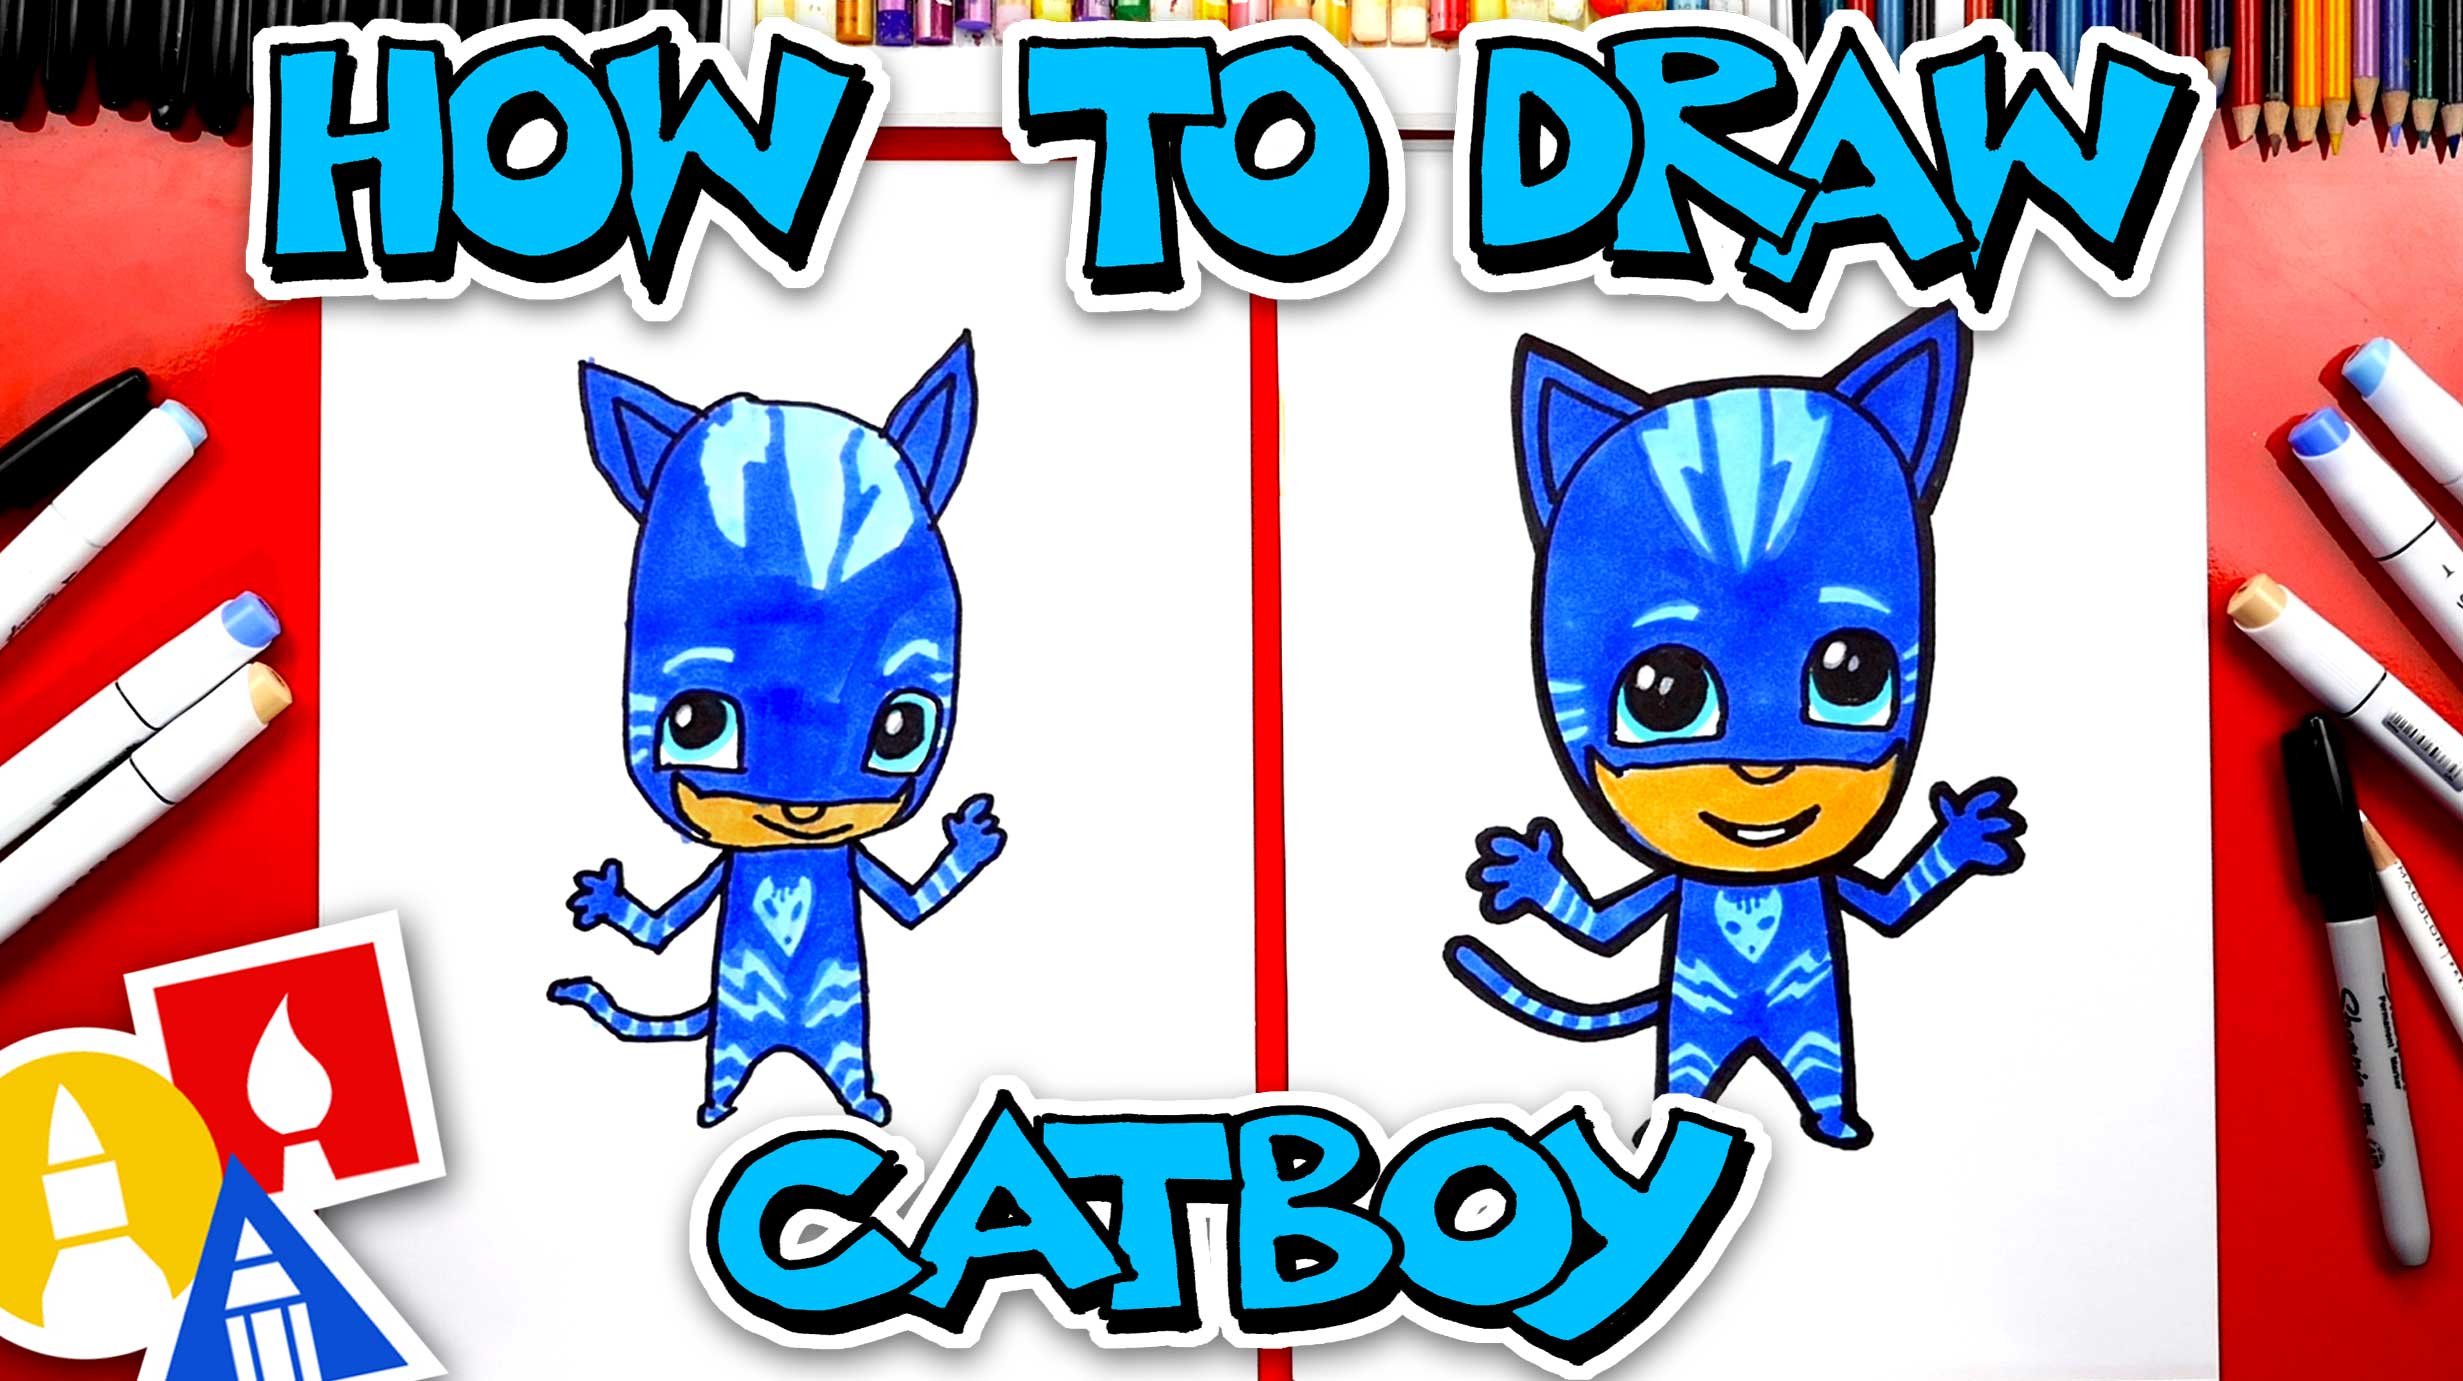 How To Draw Catboy From PJ Masks - Art For Kids Hub -